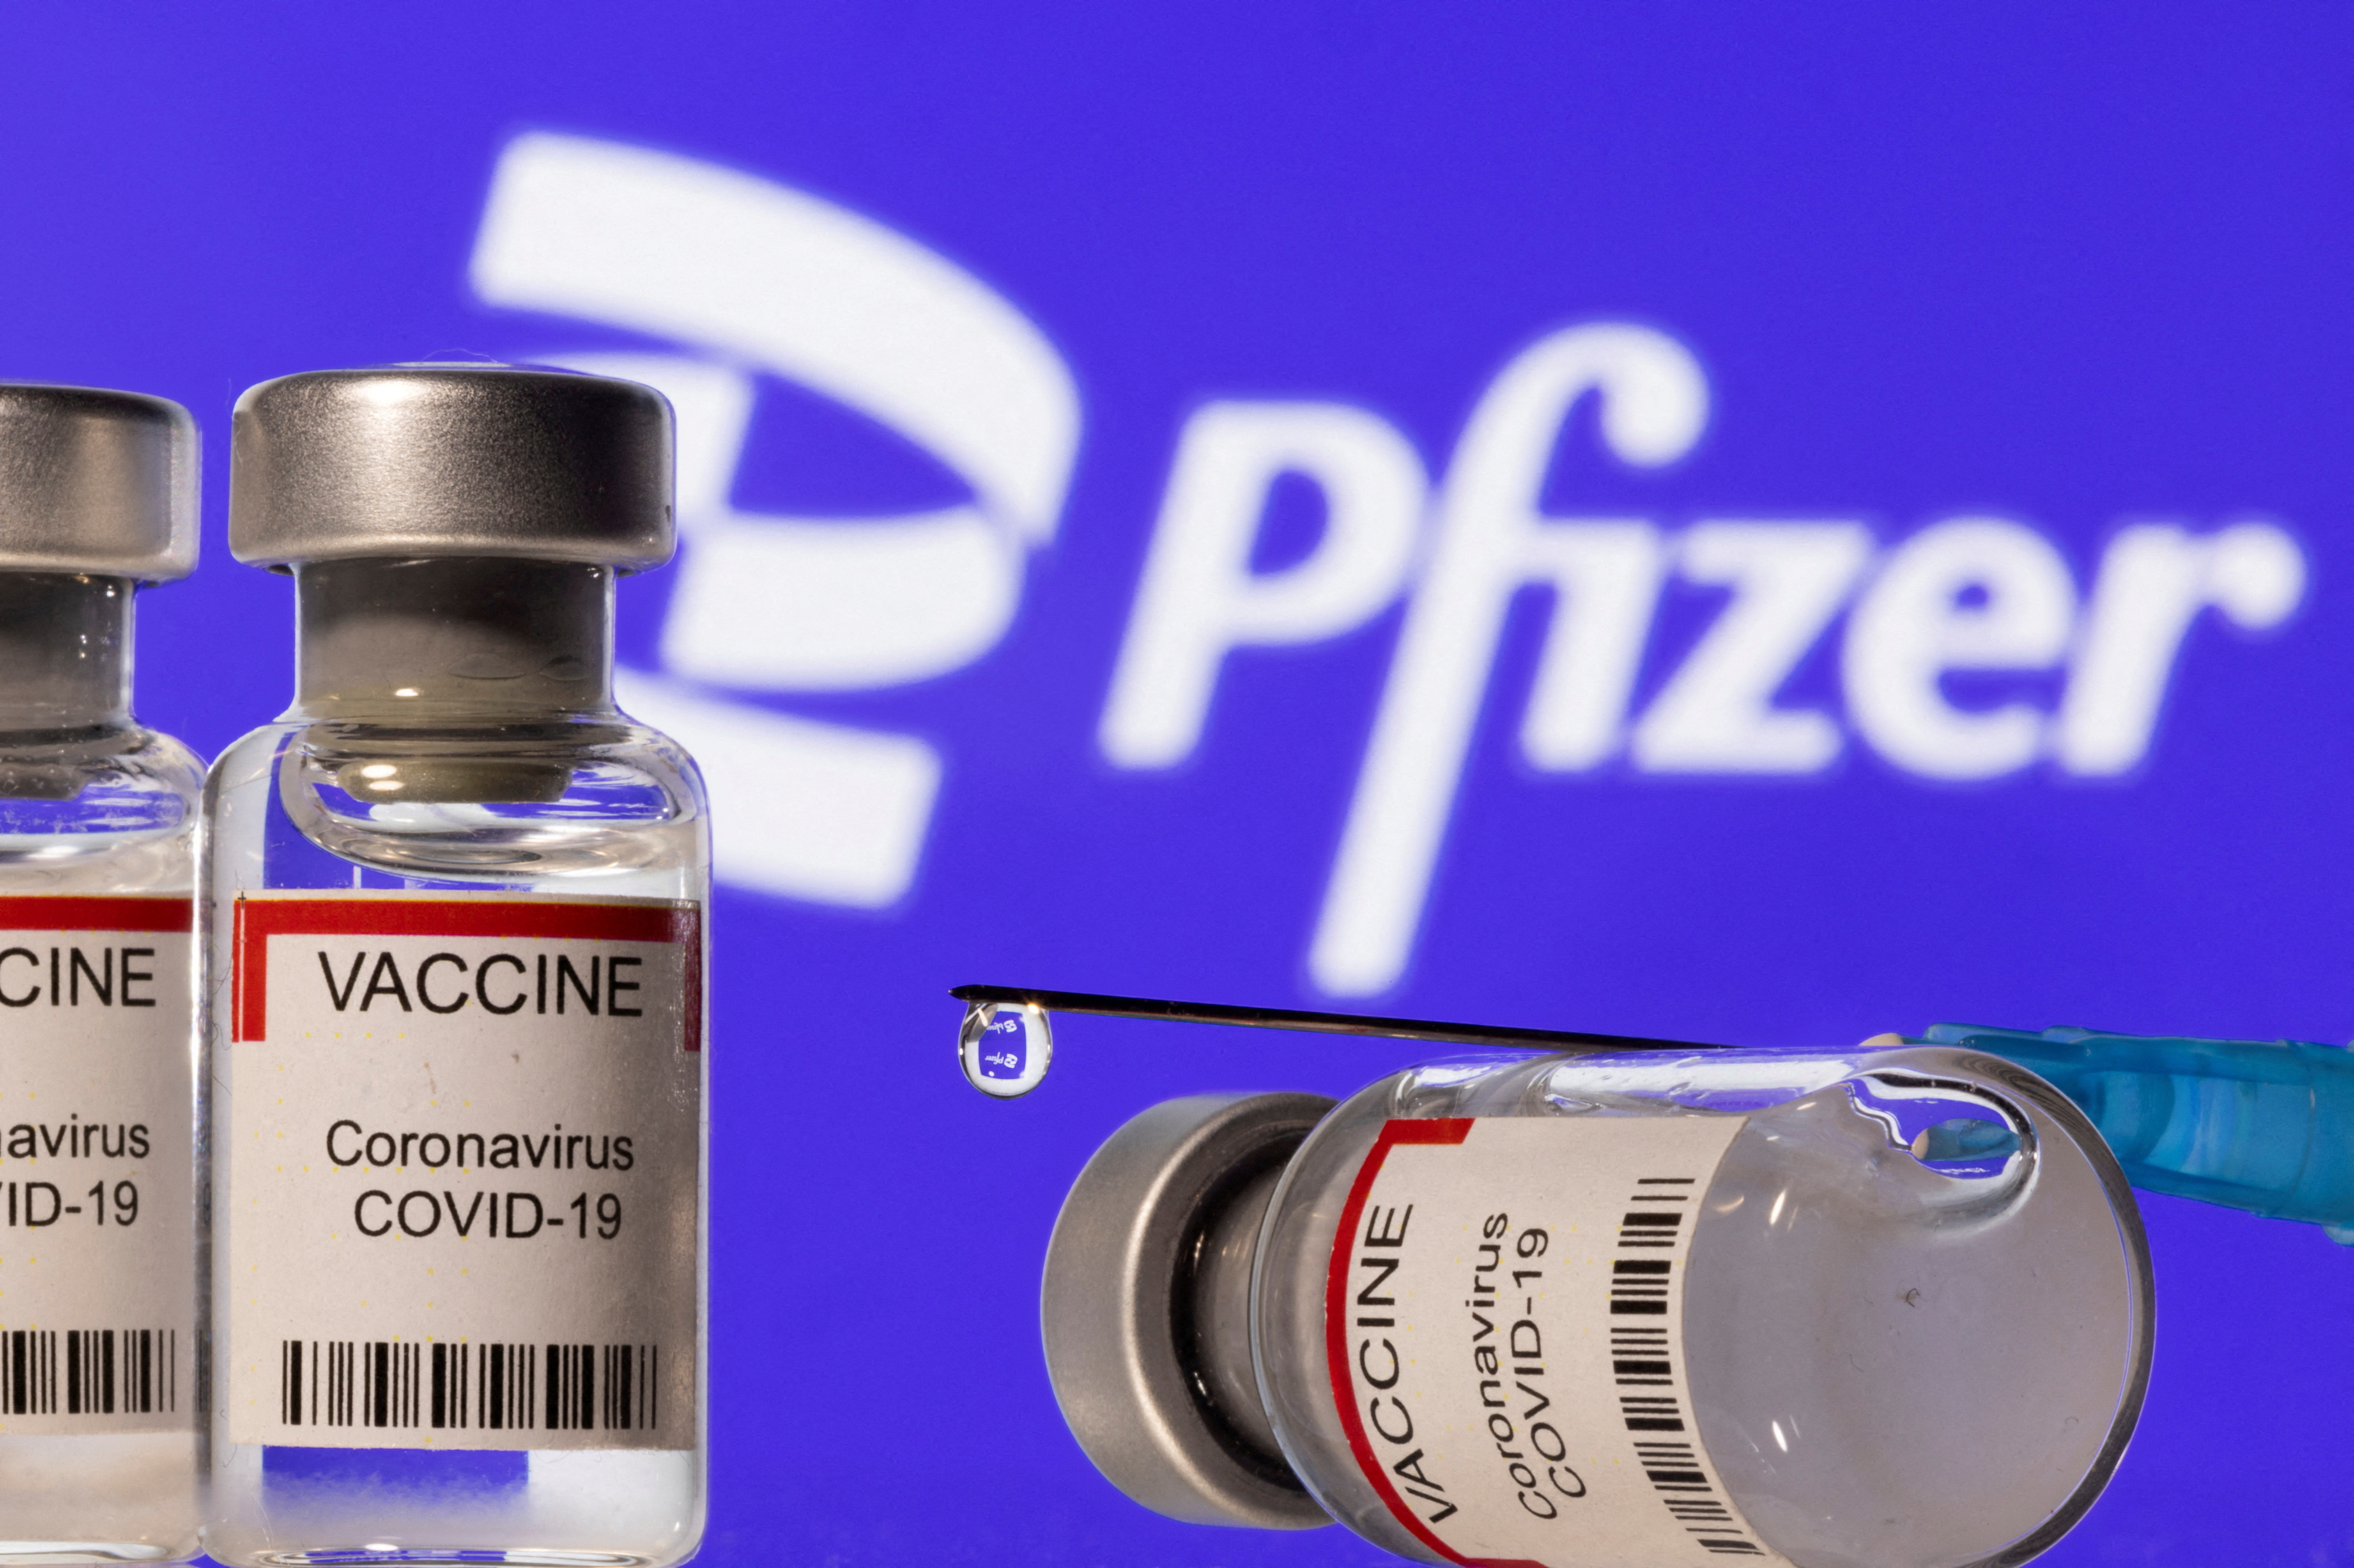 Illustration shows vials labelled "VACCINE Coronavirus COVID-19" and a syringe in front of a displayed Pfizer logo